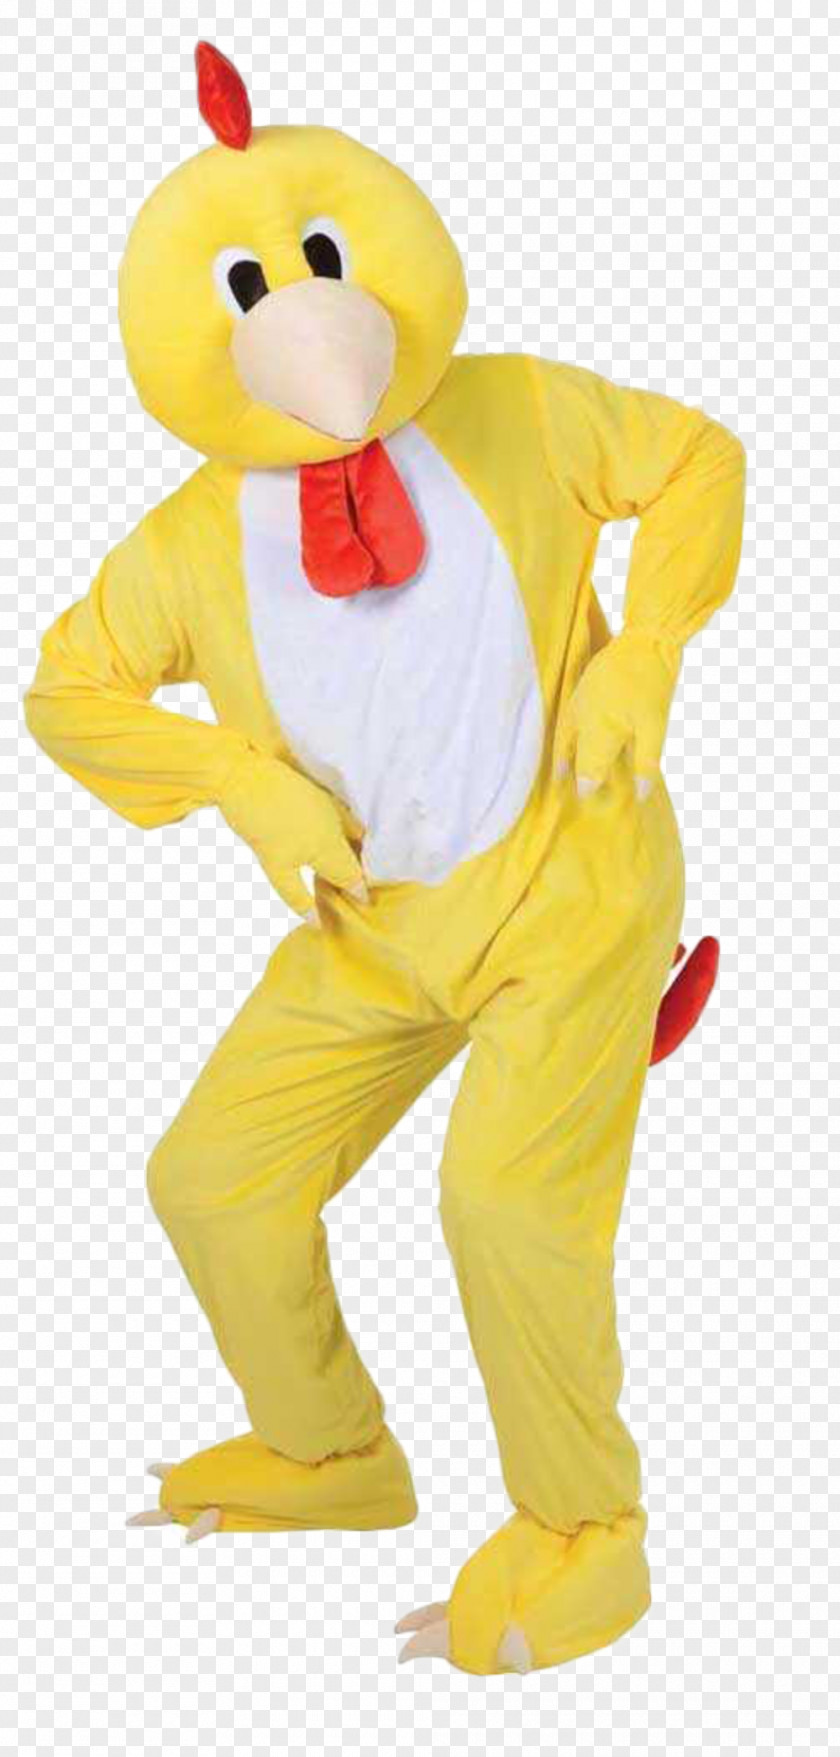 Party Easter Bunny Costume Clothing PNG